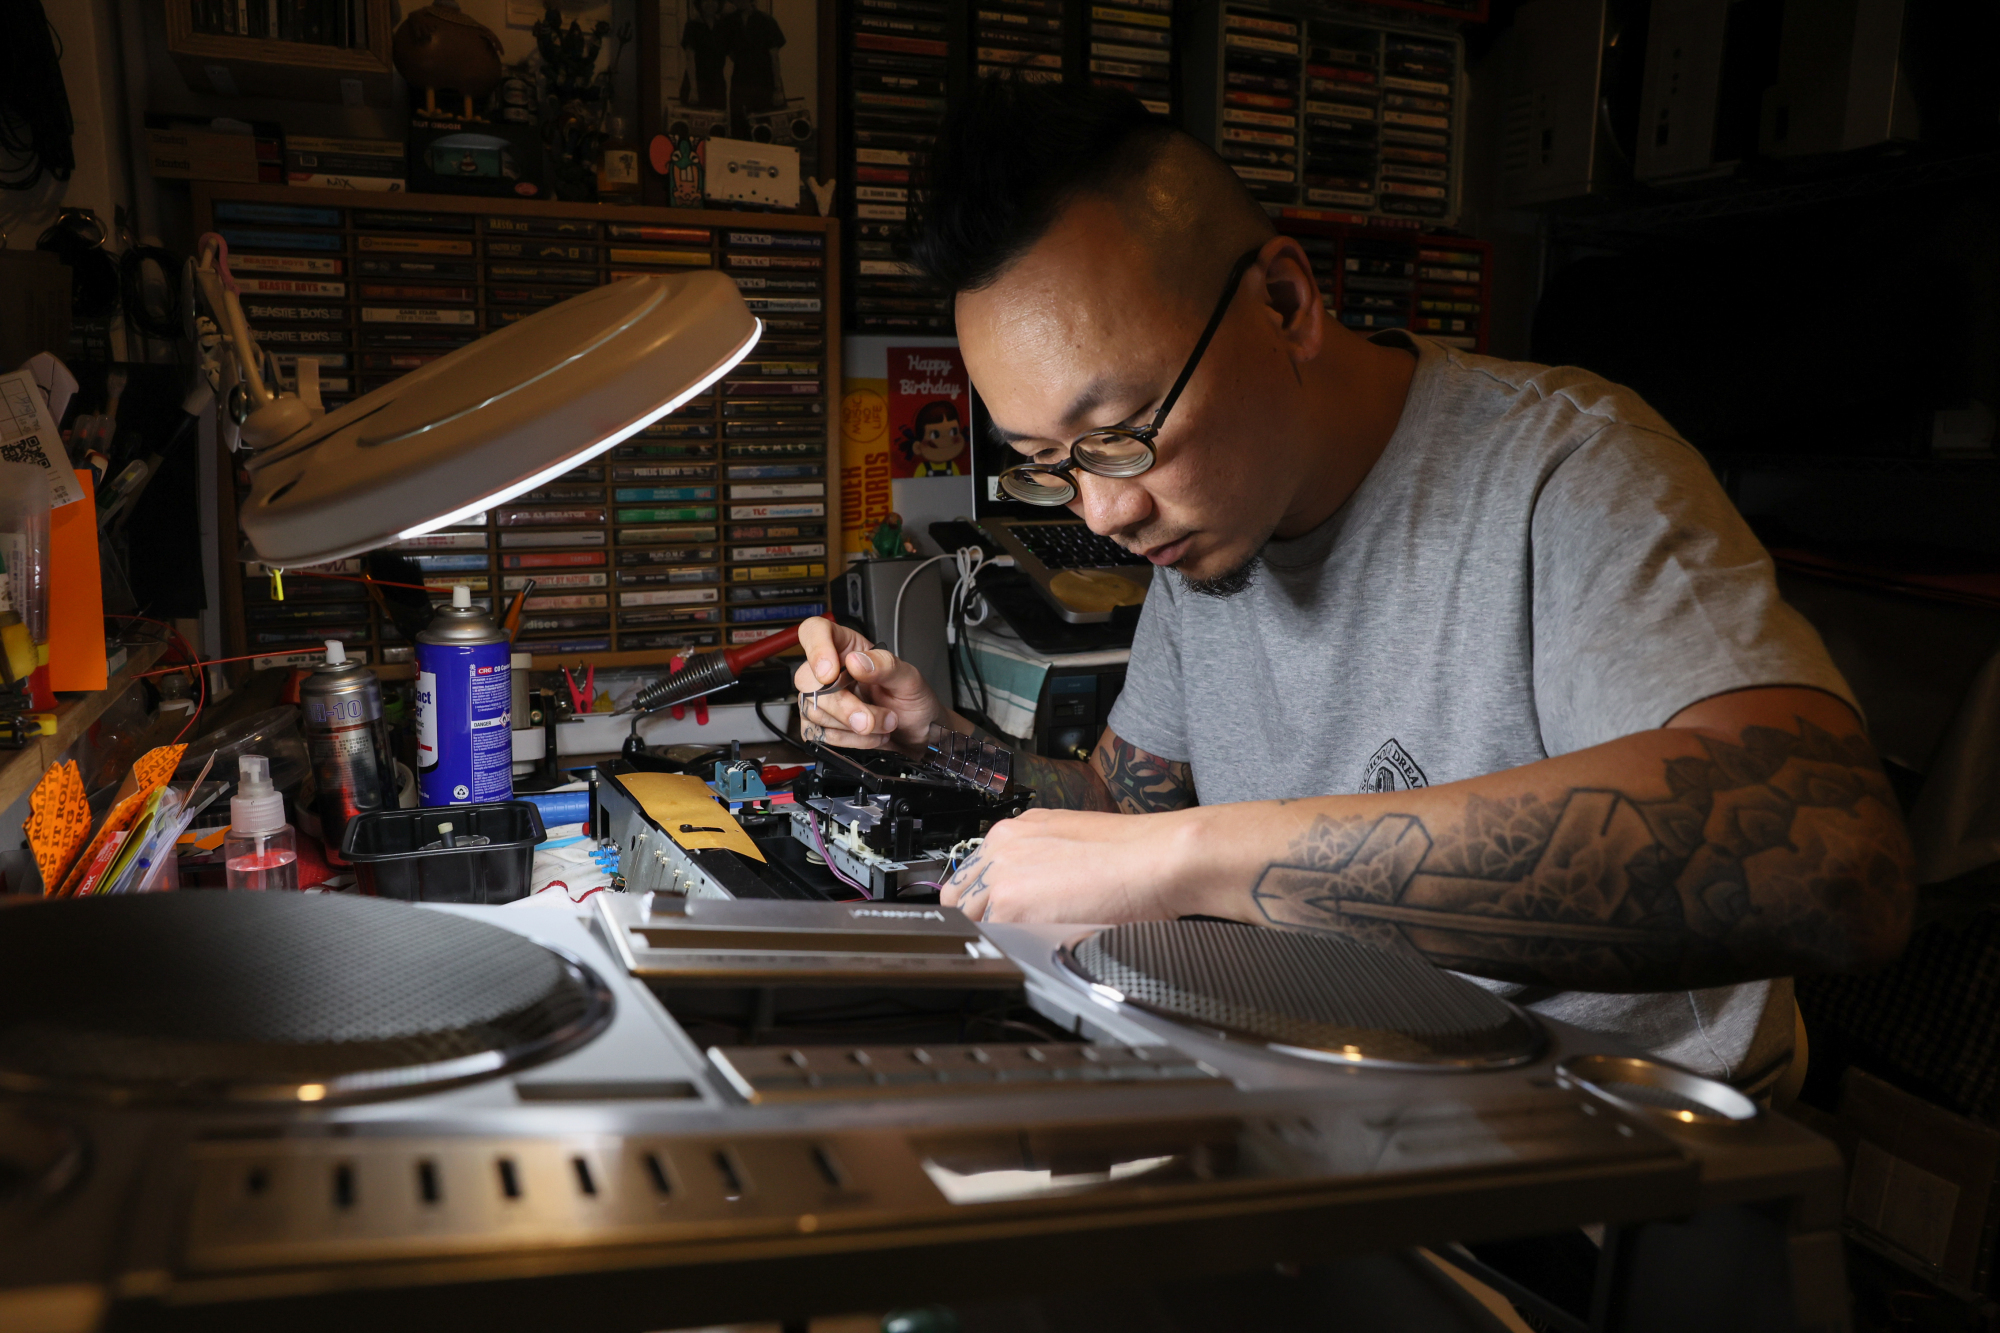 Chow repairs old audio players. Photo: Dickson Lee